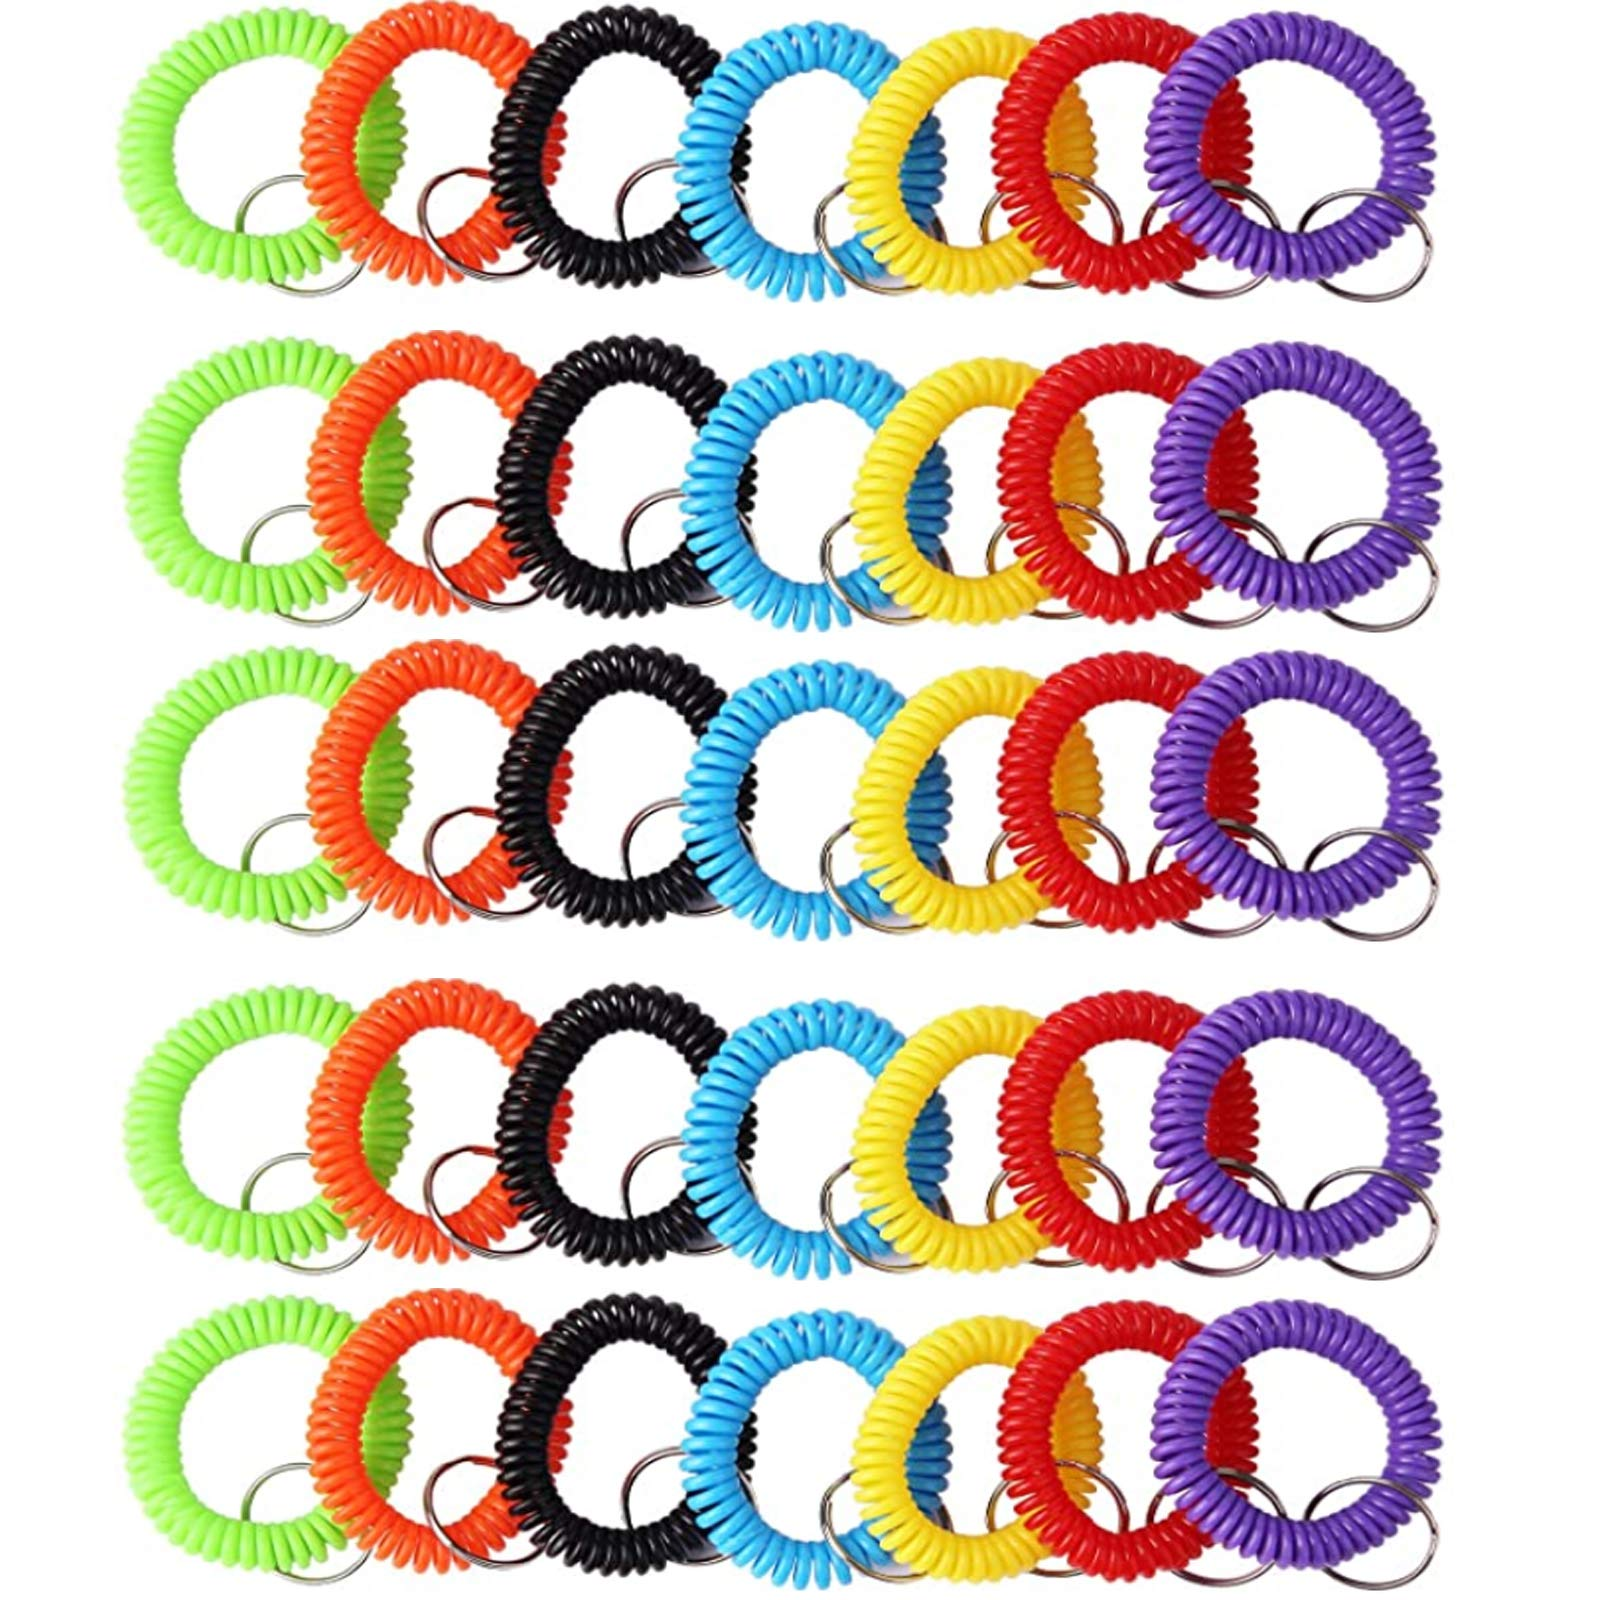 JIAKAI Pack of 35 Assorted Color Stretchable Plastic Bracelet Wrist Coil Wrist Band Key Ring Chain Holder Tag (35PCS-7 Mixed Color)